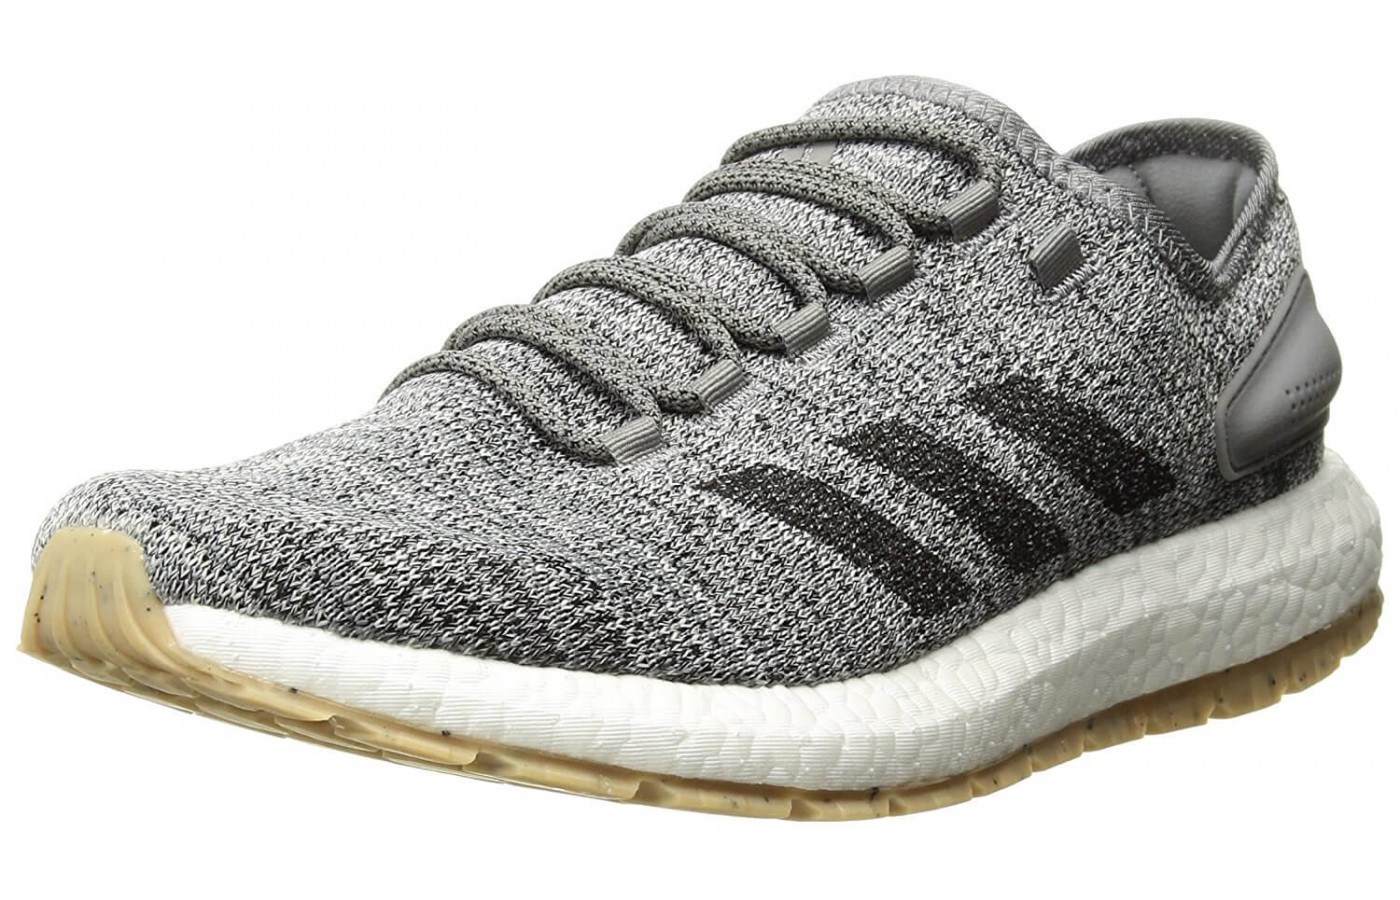 An angled view of the Adidas Pureboost All-Terrain.